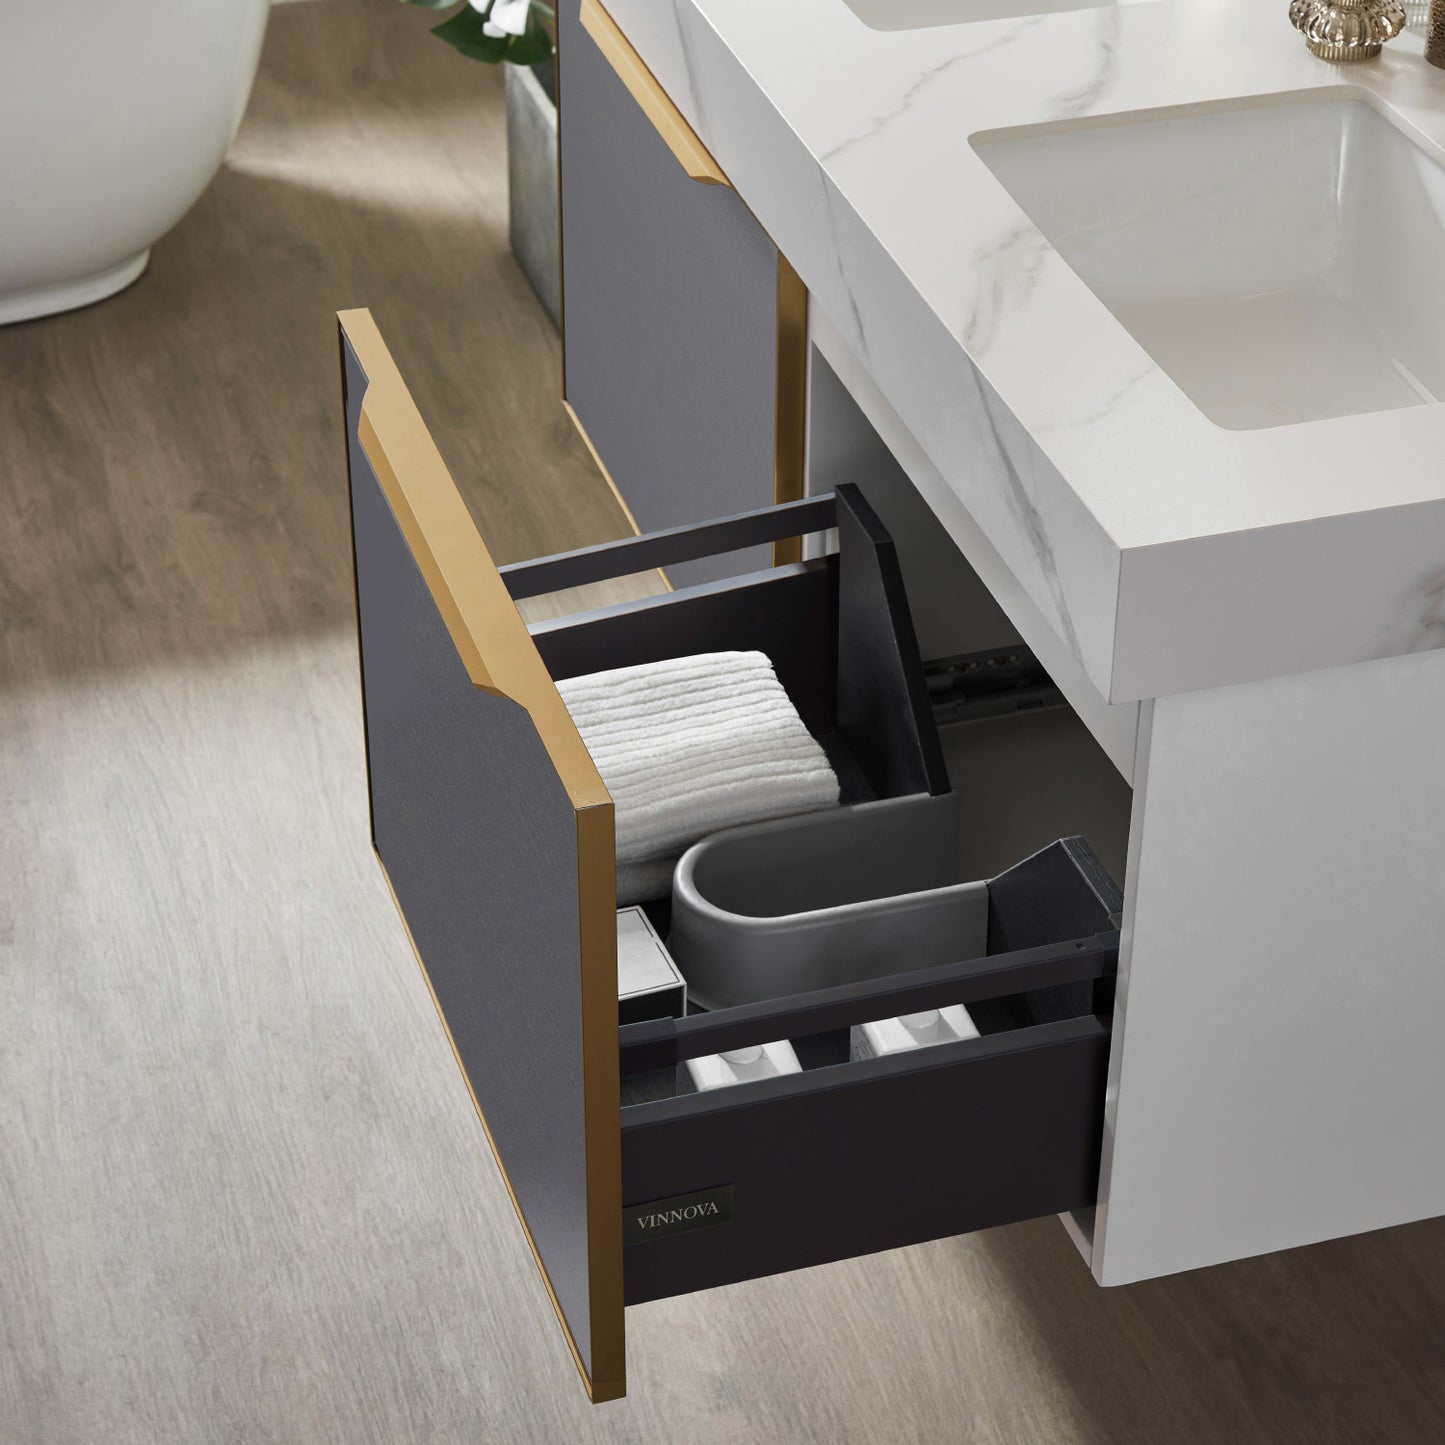 Alicante 48M" Vanity in Grey with White Sintered Stone Countertop and undermount sink Without Mirror